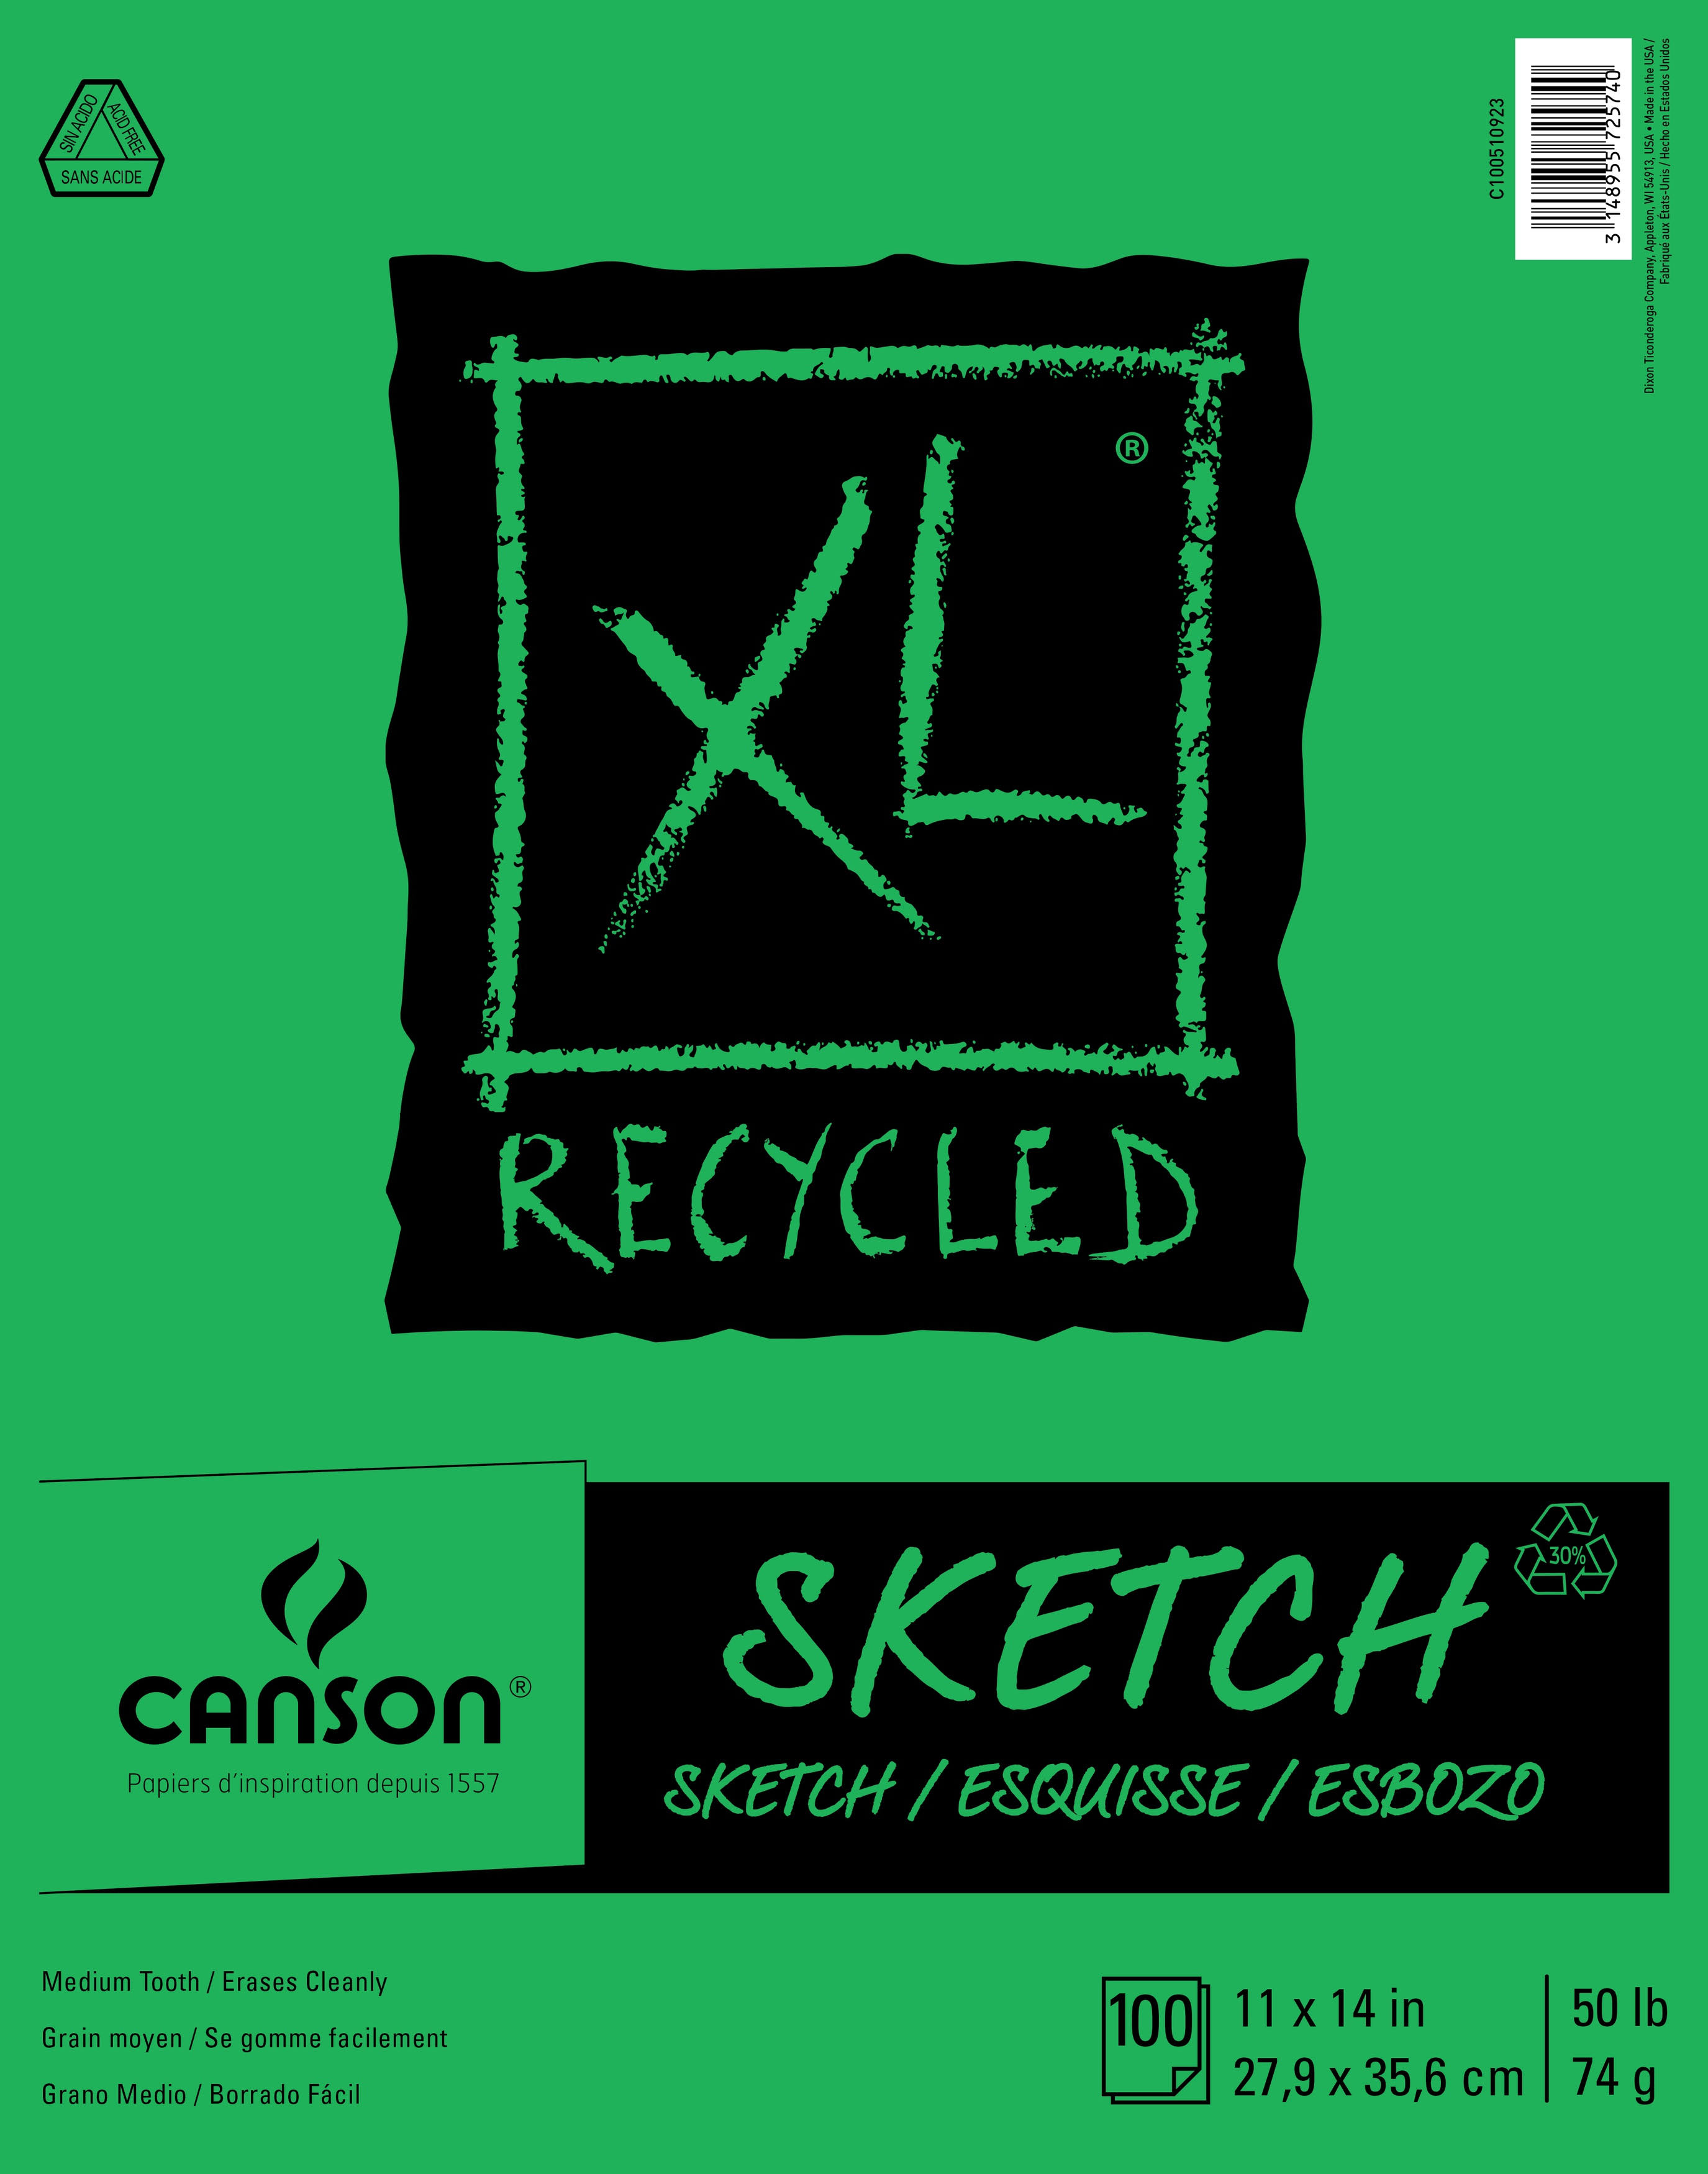 Canson 457487 XL Recycled Sketch Paper Pad - 11" x 14", 100 Sheets